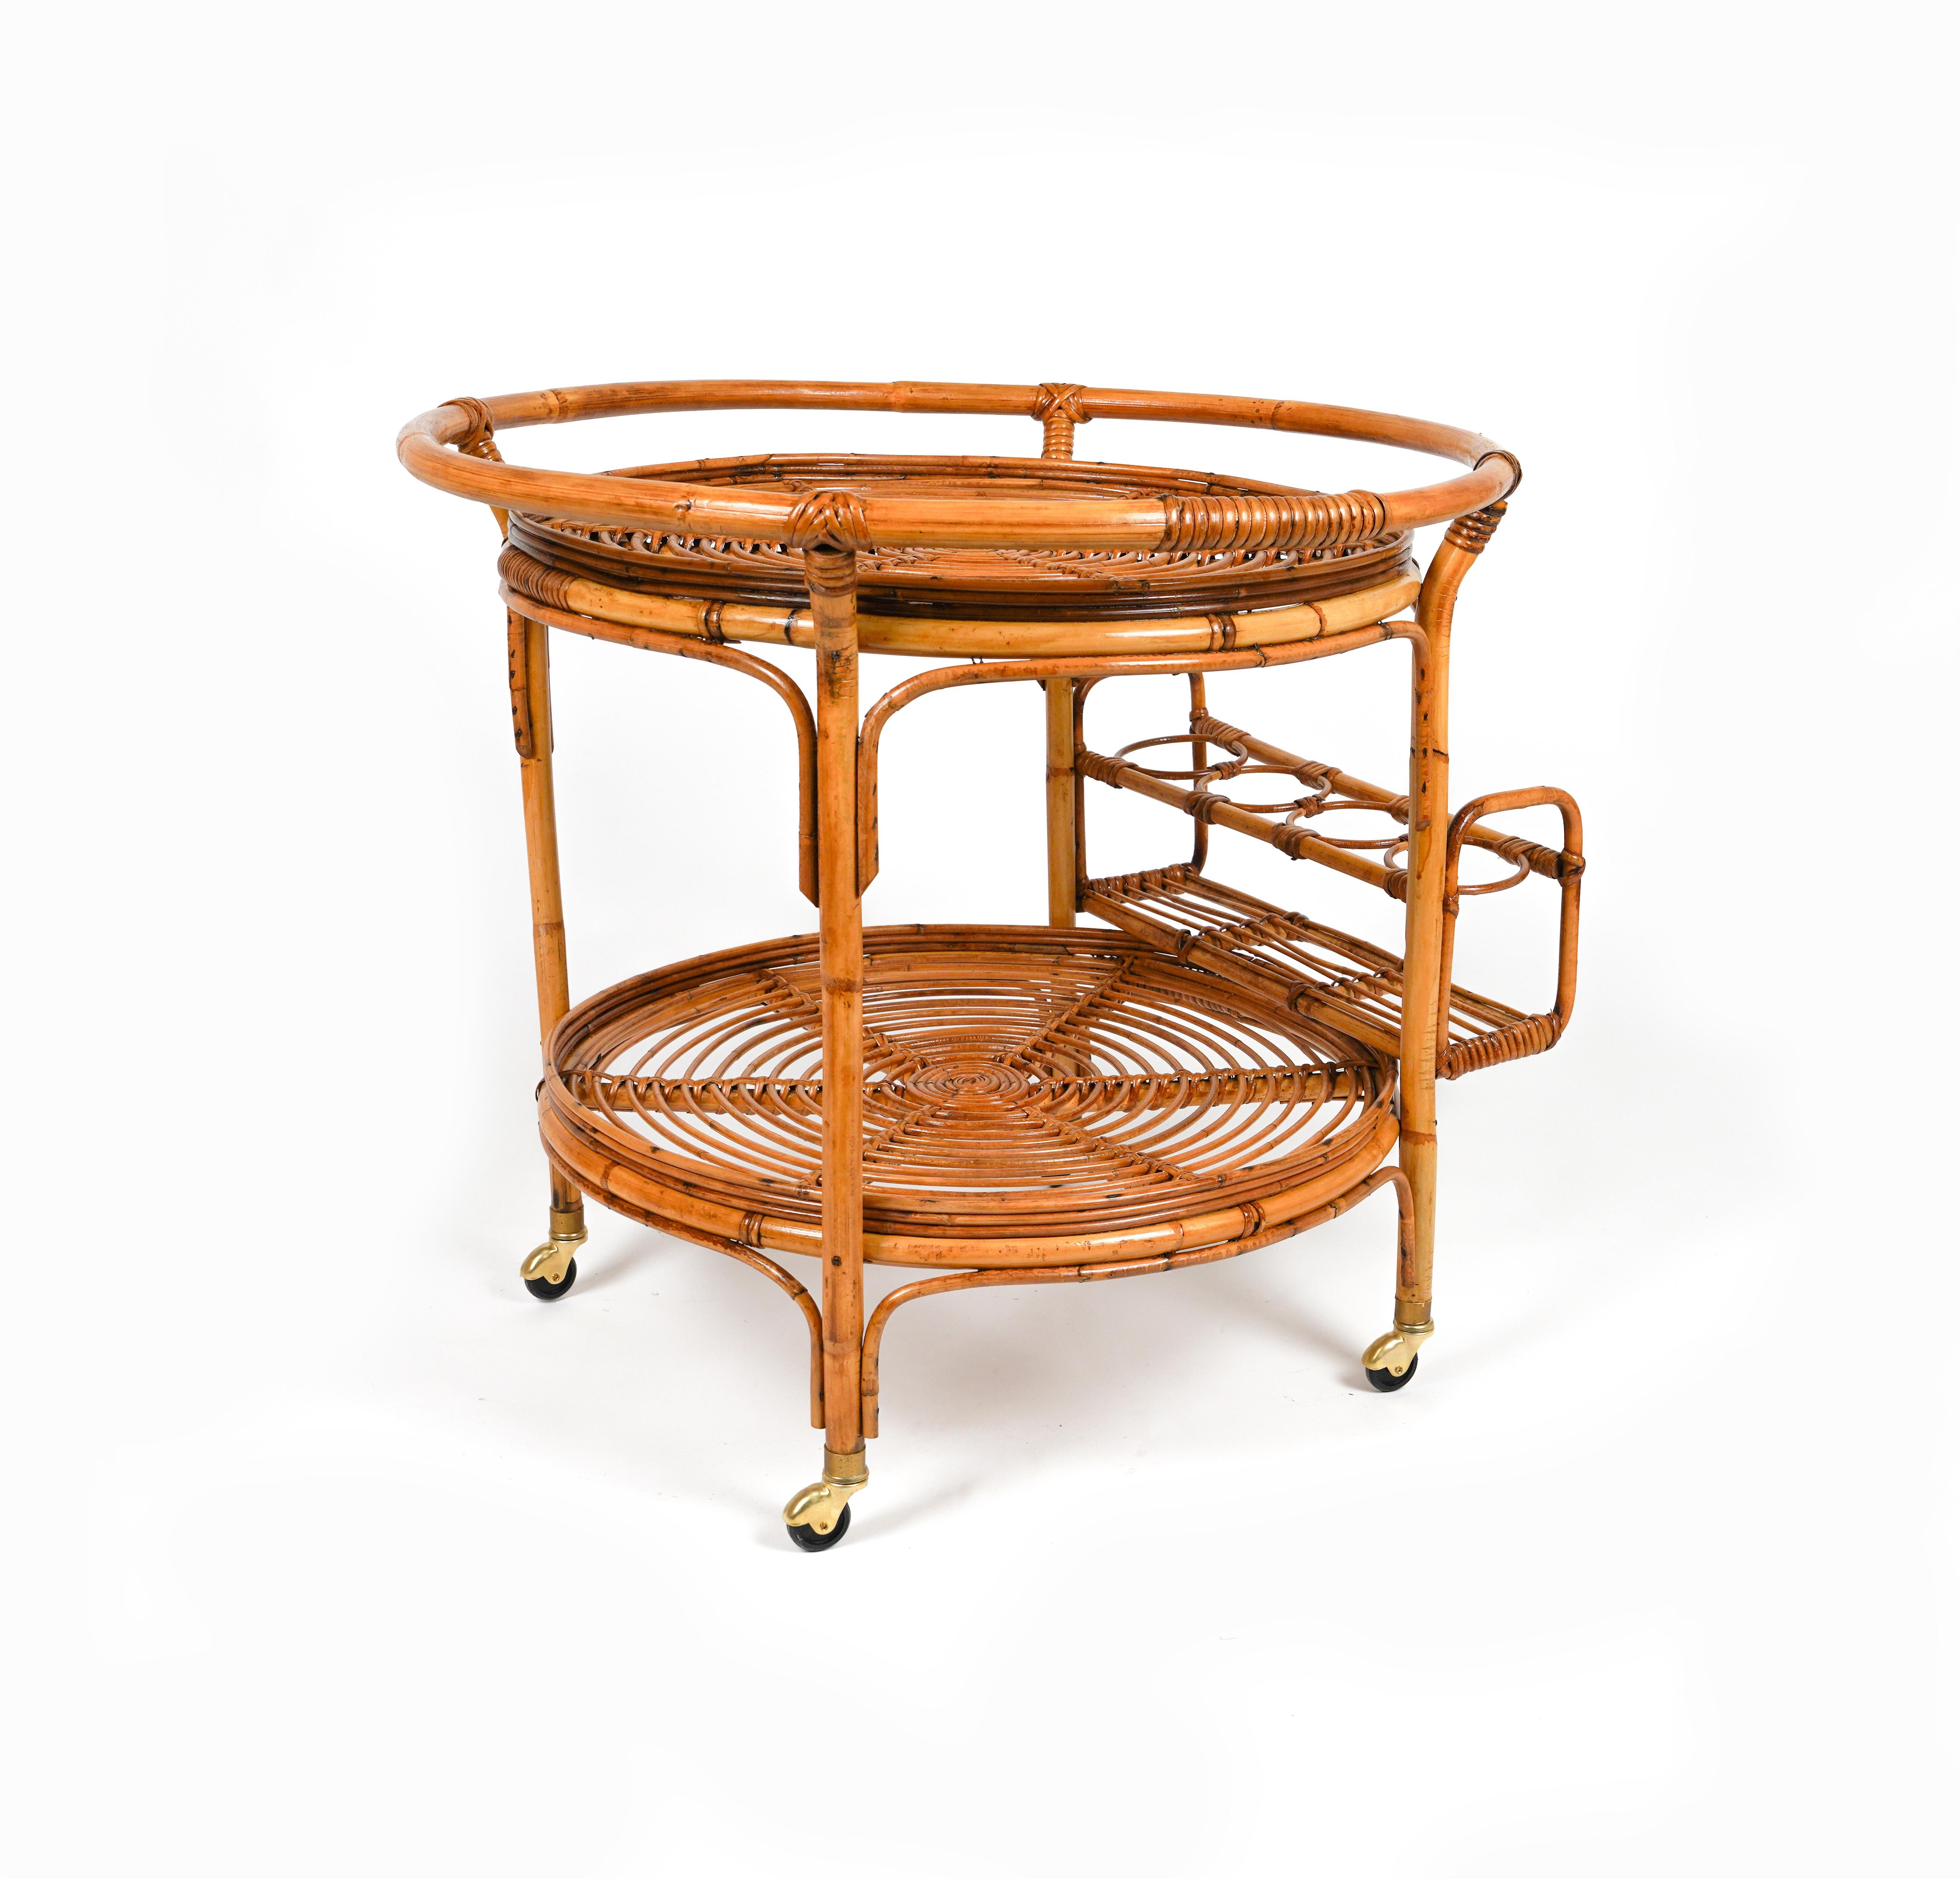 Midcentury Rattan and Bamboo Round Serving Bar Cart Trolley, Italy 1960s For Sale 5